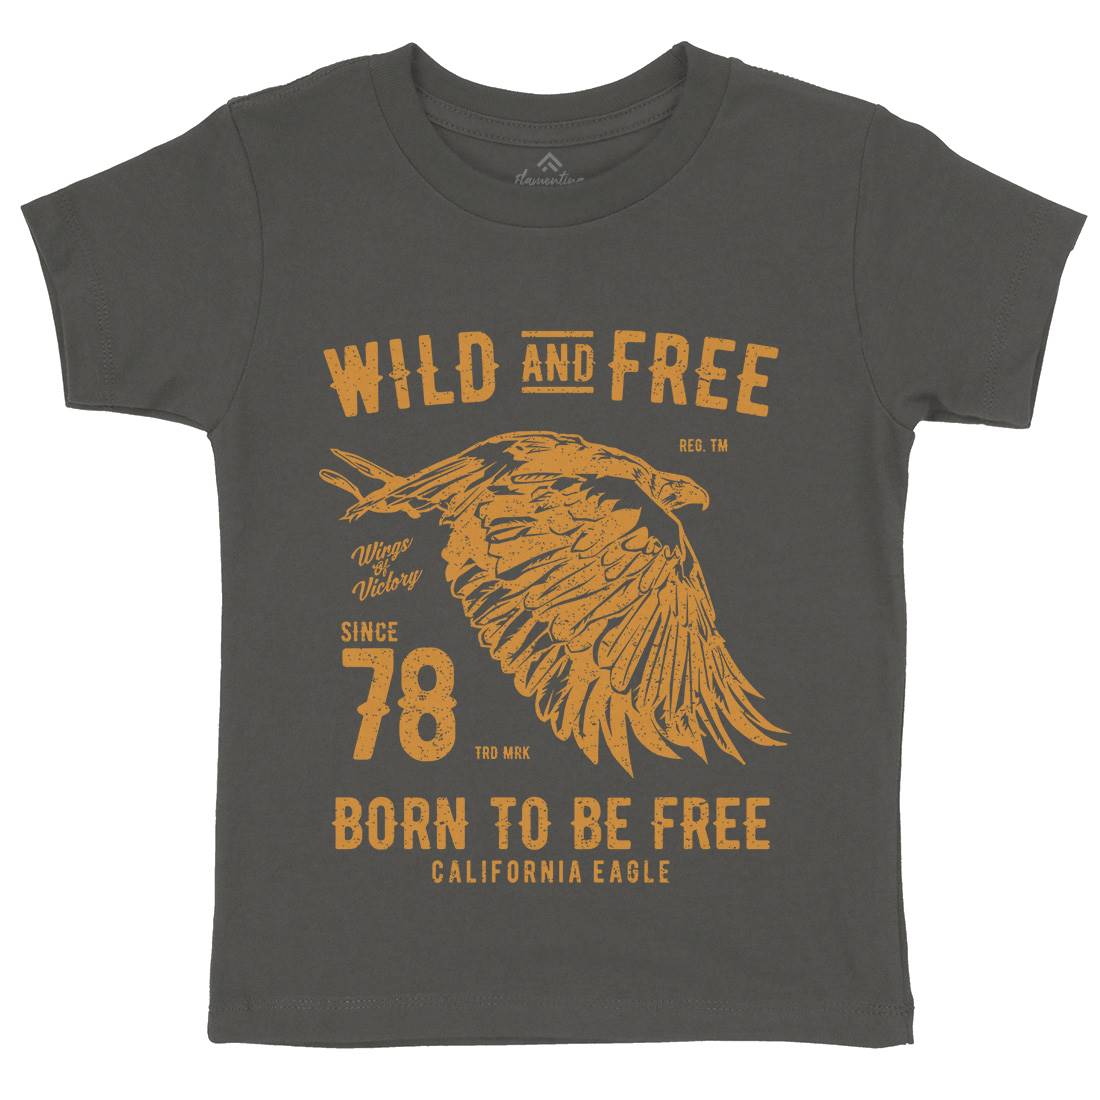 Wild And Free Kids Crew Neck T-Shirt Army A792